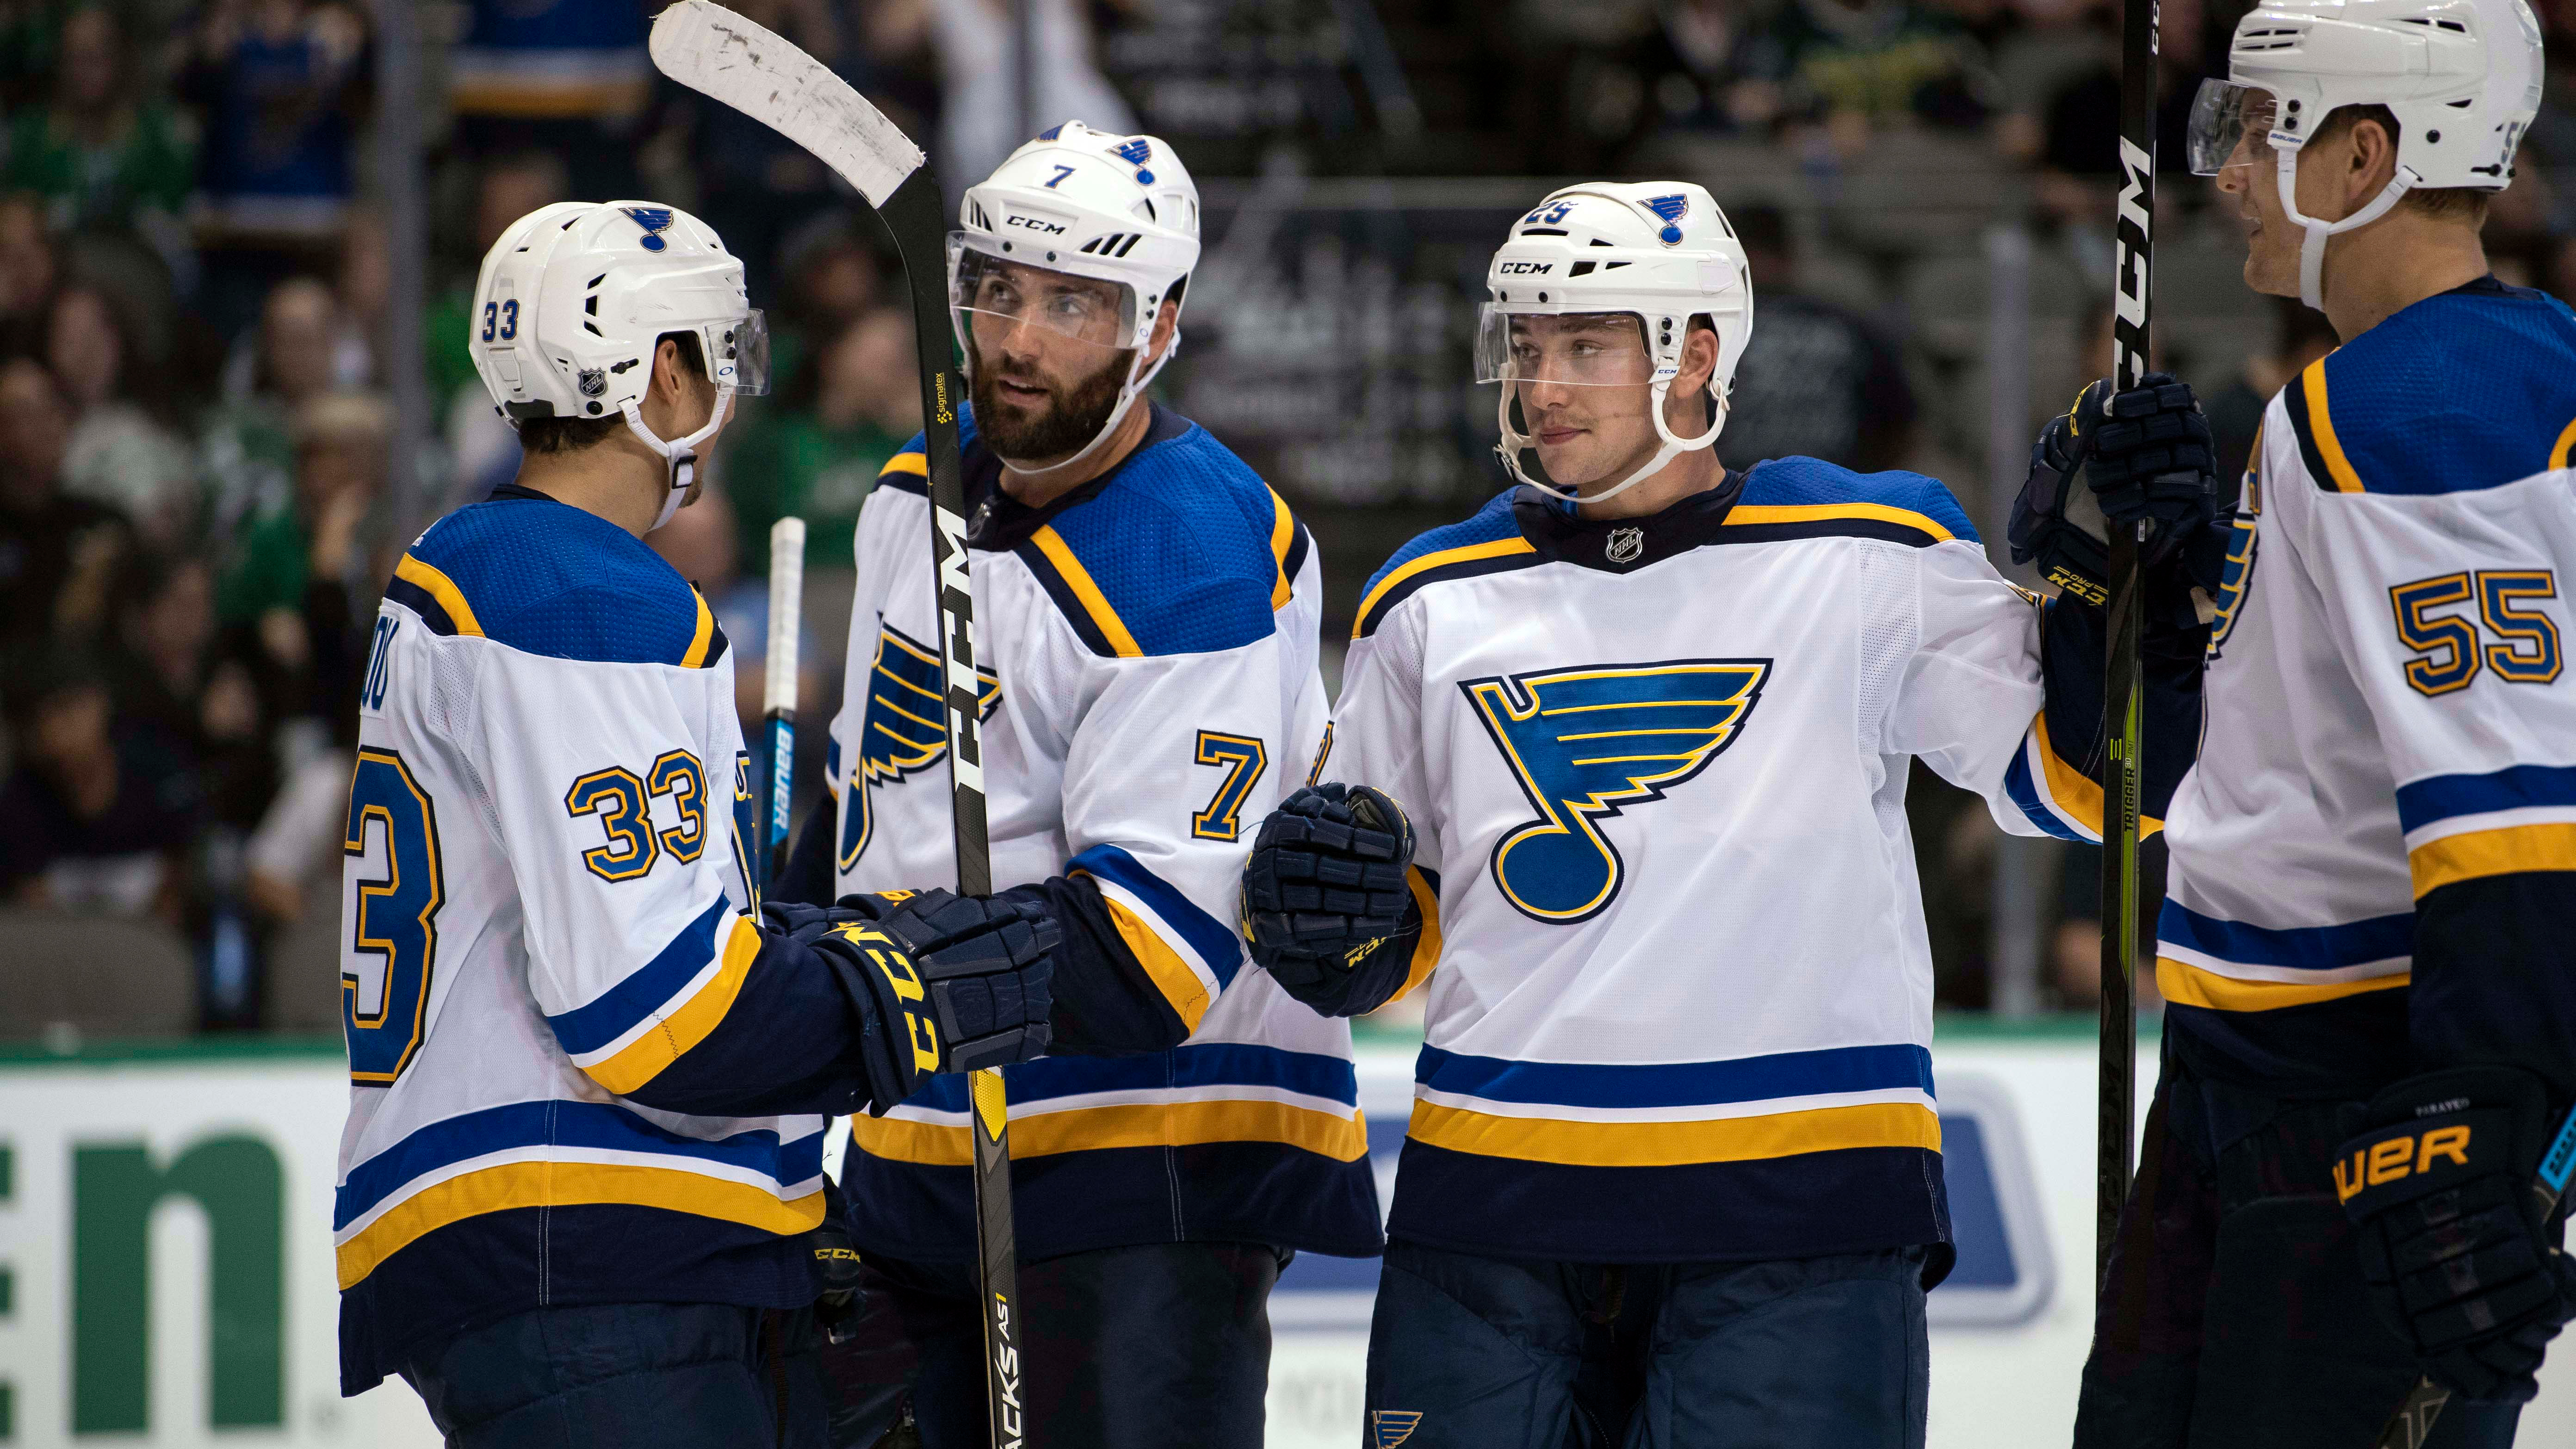 Blues season preview debuts Sunday on FOX Sports Midwest